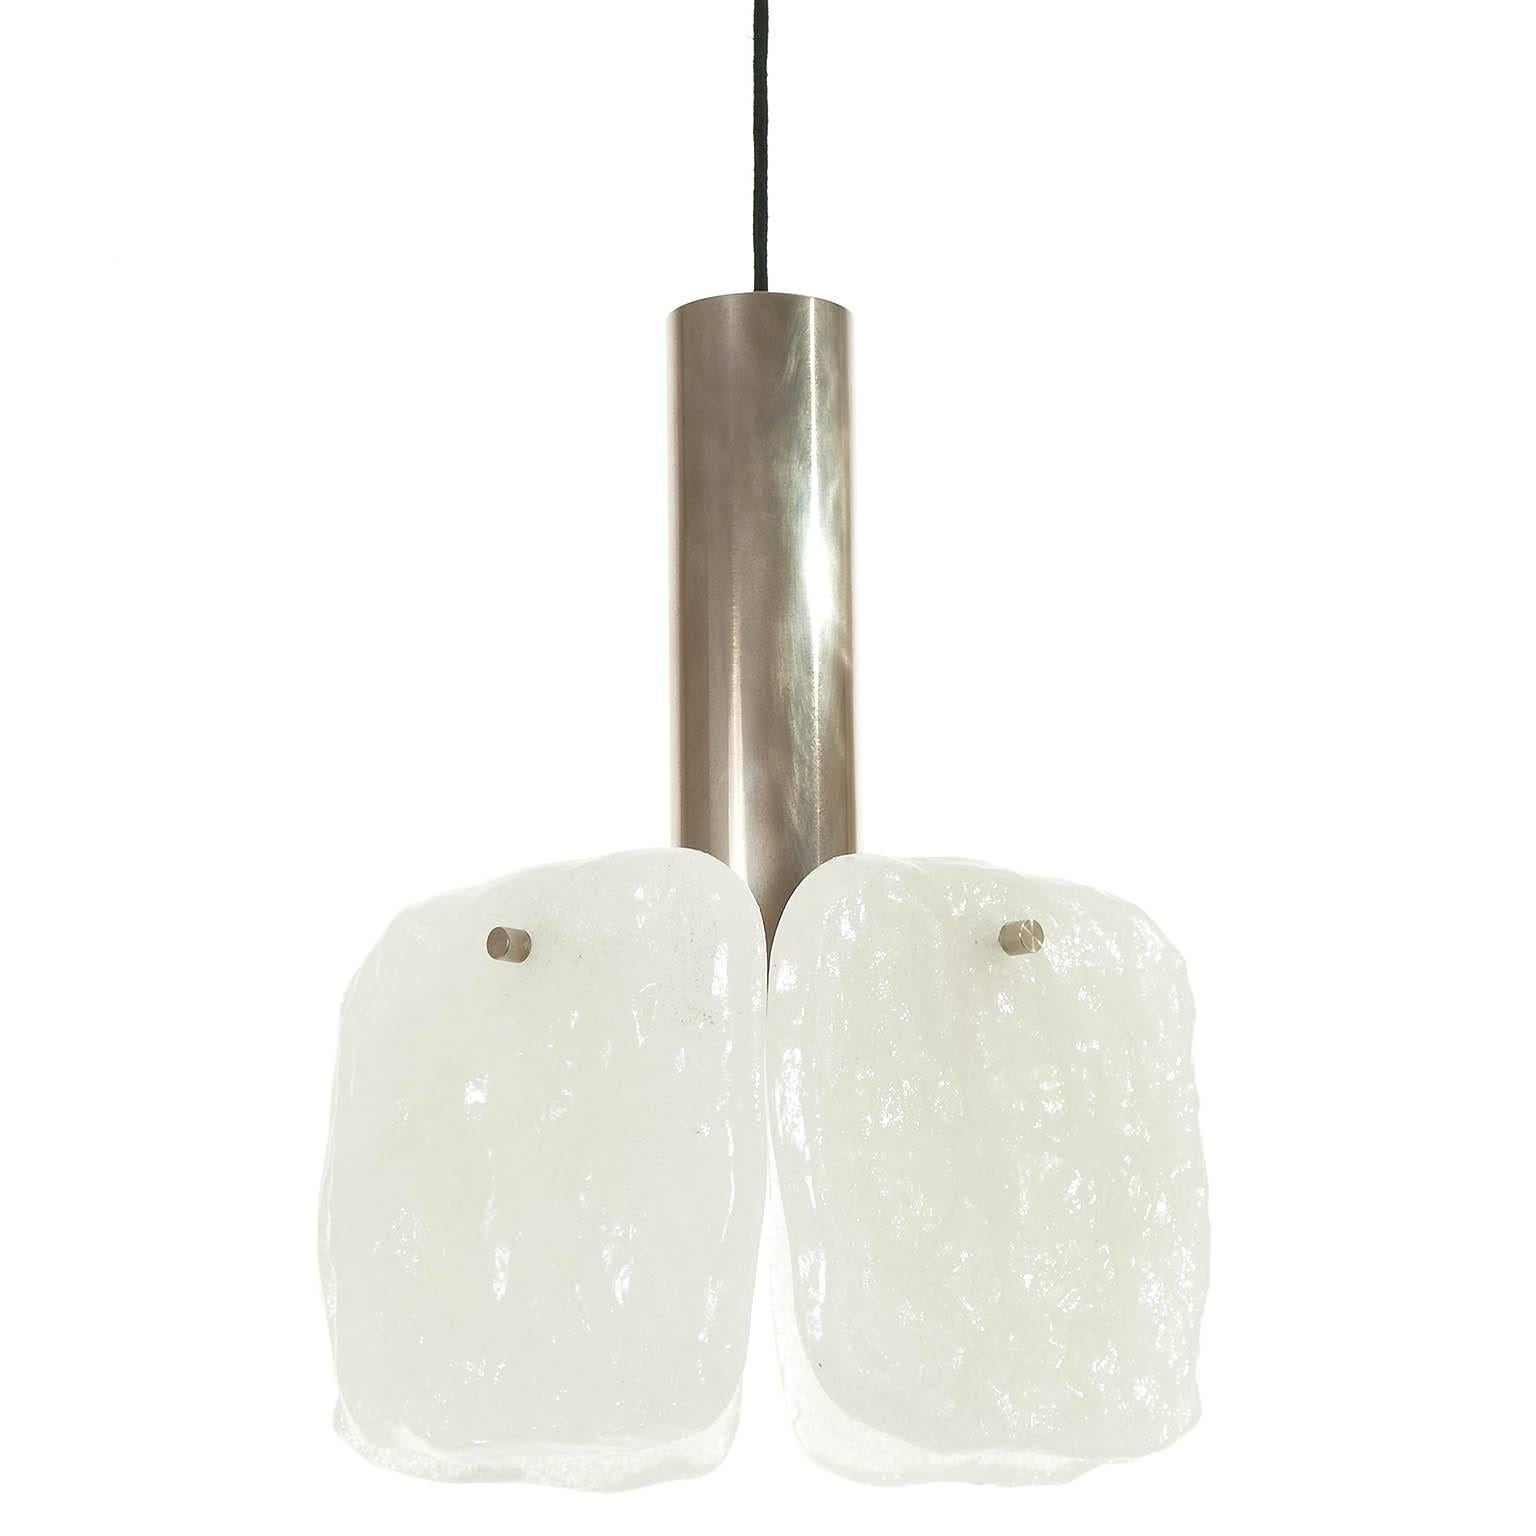 Frosted One of Three Kalmar Pendant Lights, Ice Glass and Chrome, 1960s For Sale